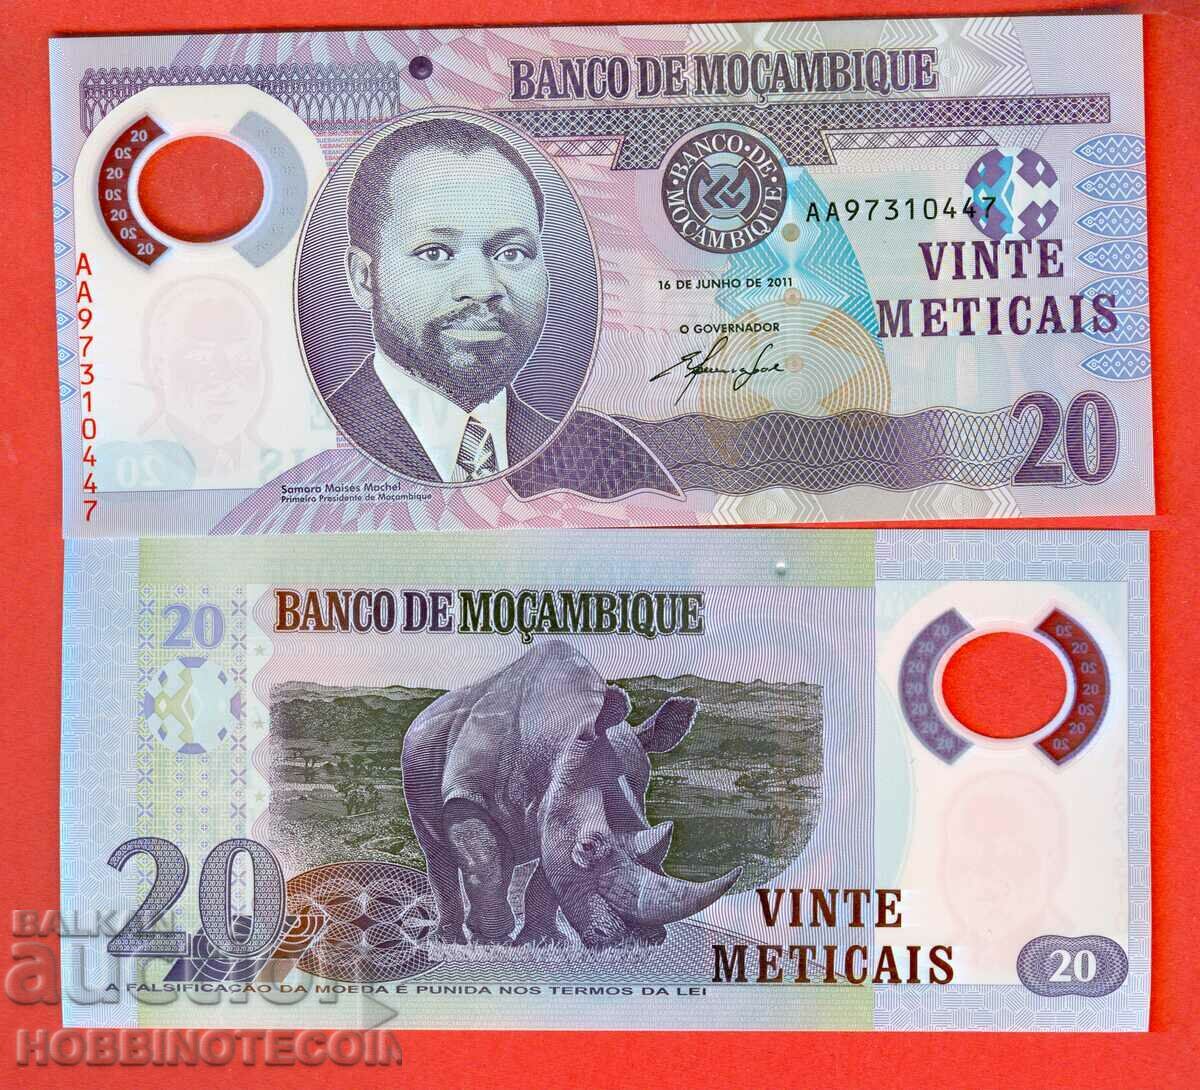 MOZAMBIC MOZAMBIC 20 Emisiune Metical 2011 UNC POLYMER